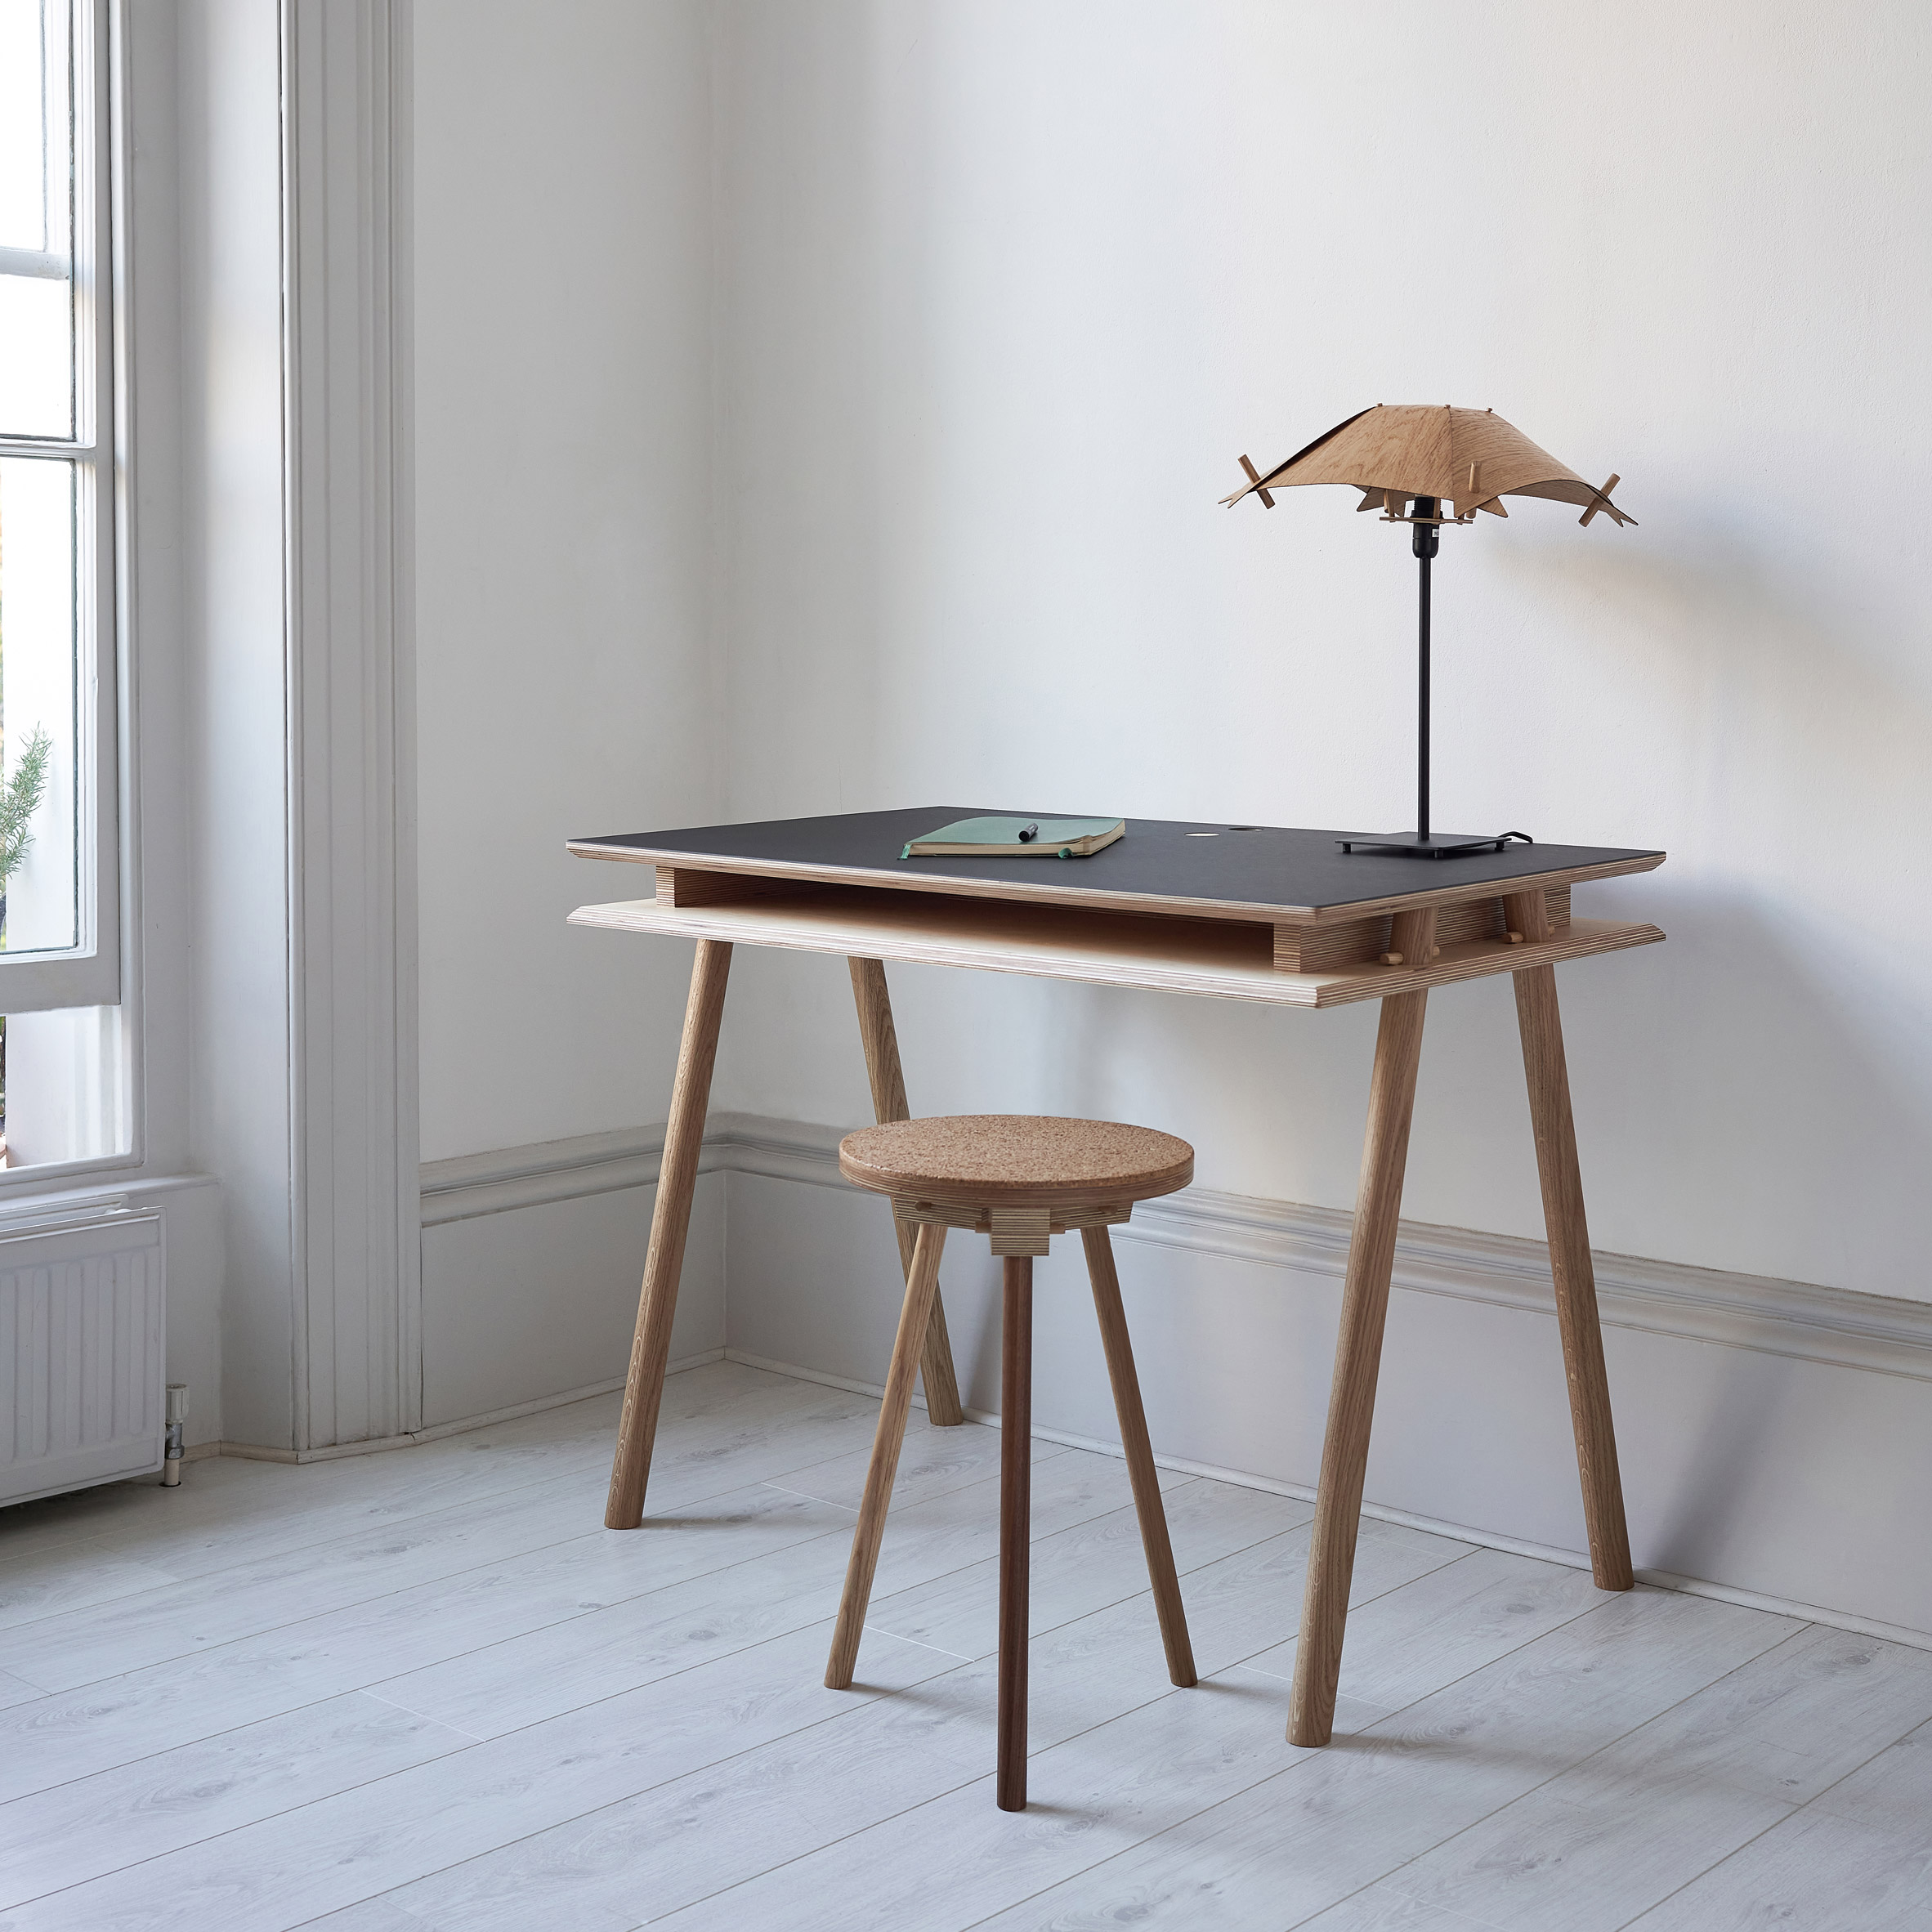 A desk, lamp and stool in the Pegg Furniture range